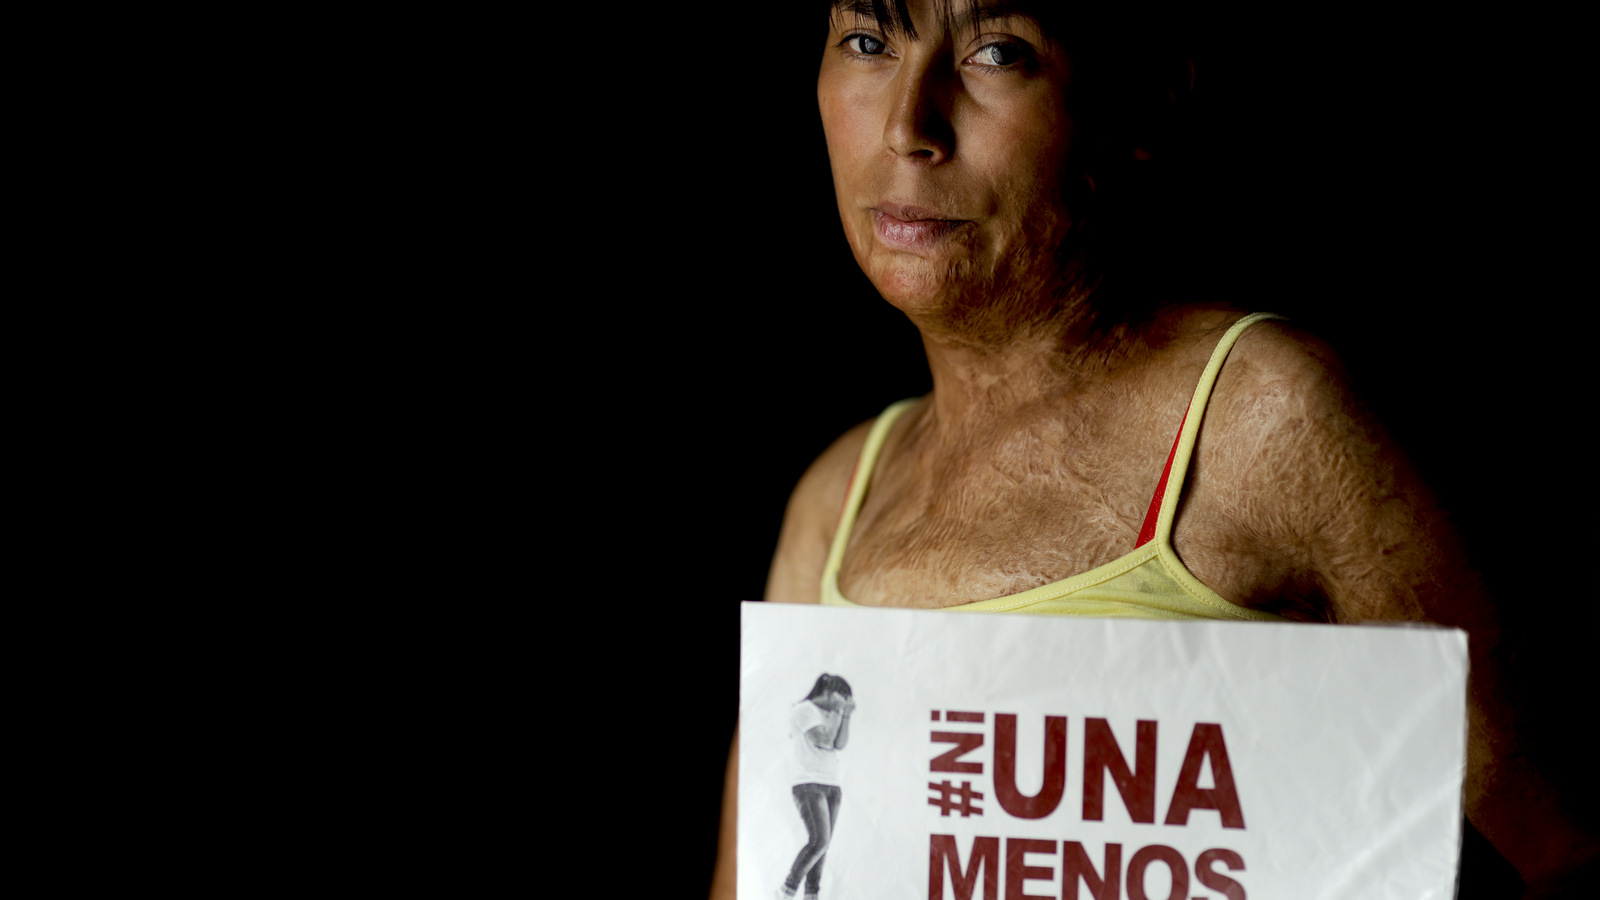 In this Feb. 9, 2017 photo, Maira Maidana poses for a portrait with the name of the women's movement "Not one Less" in Buenos Aires, Argentina. Fifty-nine surgeries later, Maidana has finally found the courage to tell the truth about what happened to her the night her husband set her on fire. She says she owes that courage to a grassroots movement of tens of thousands of people across Argentina who have mobilized to fight violence against women. Called Ni Una Menos, or Not One Less, the movement has spread rapidly across the world. (AP/Natacha Pisarenko)